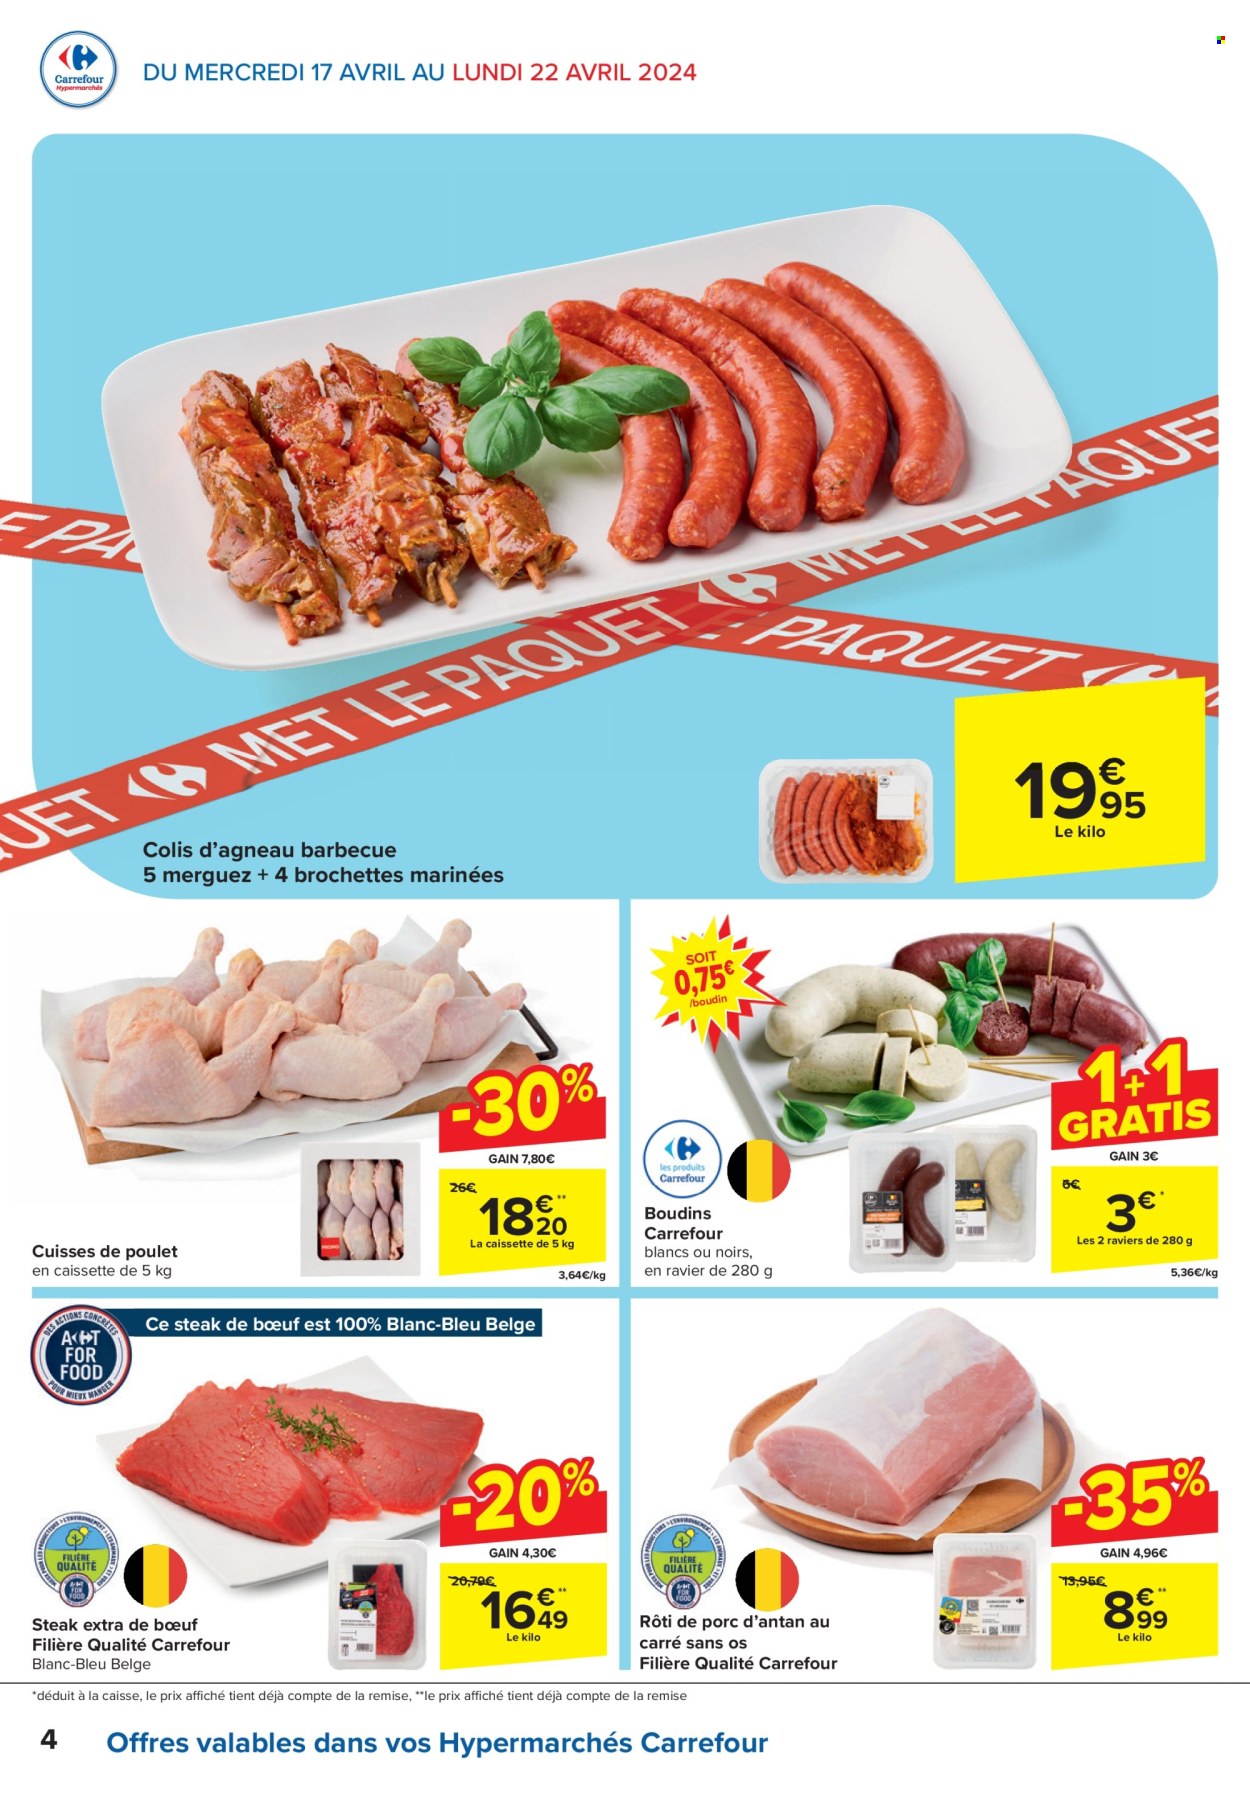 Catalogue Carrefour hypermarkt - 17.4.2024 - 29.4.2024. Page 4.